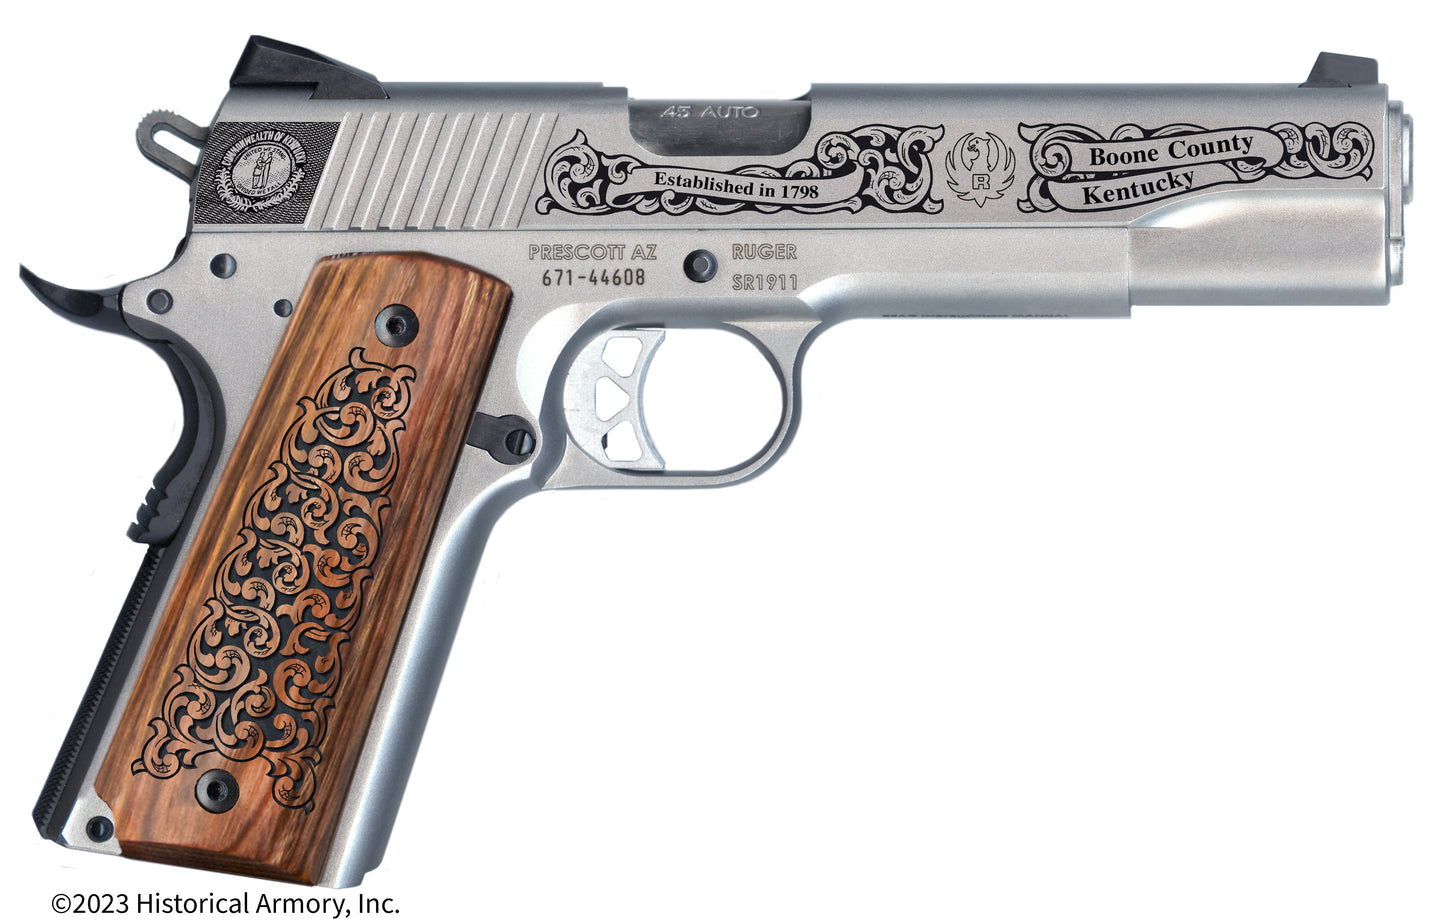 Boone County Kentucky Engraved .45 Auto Ruger 1911